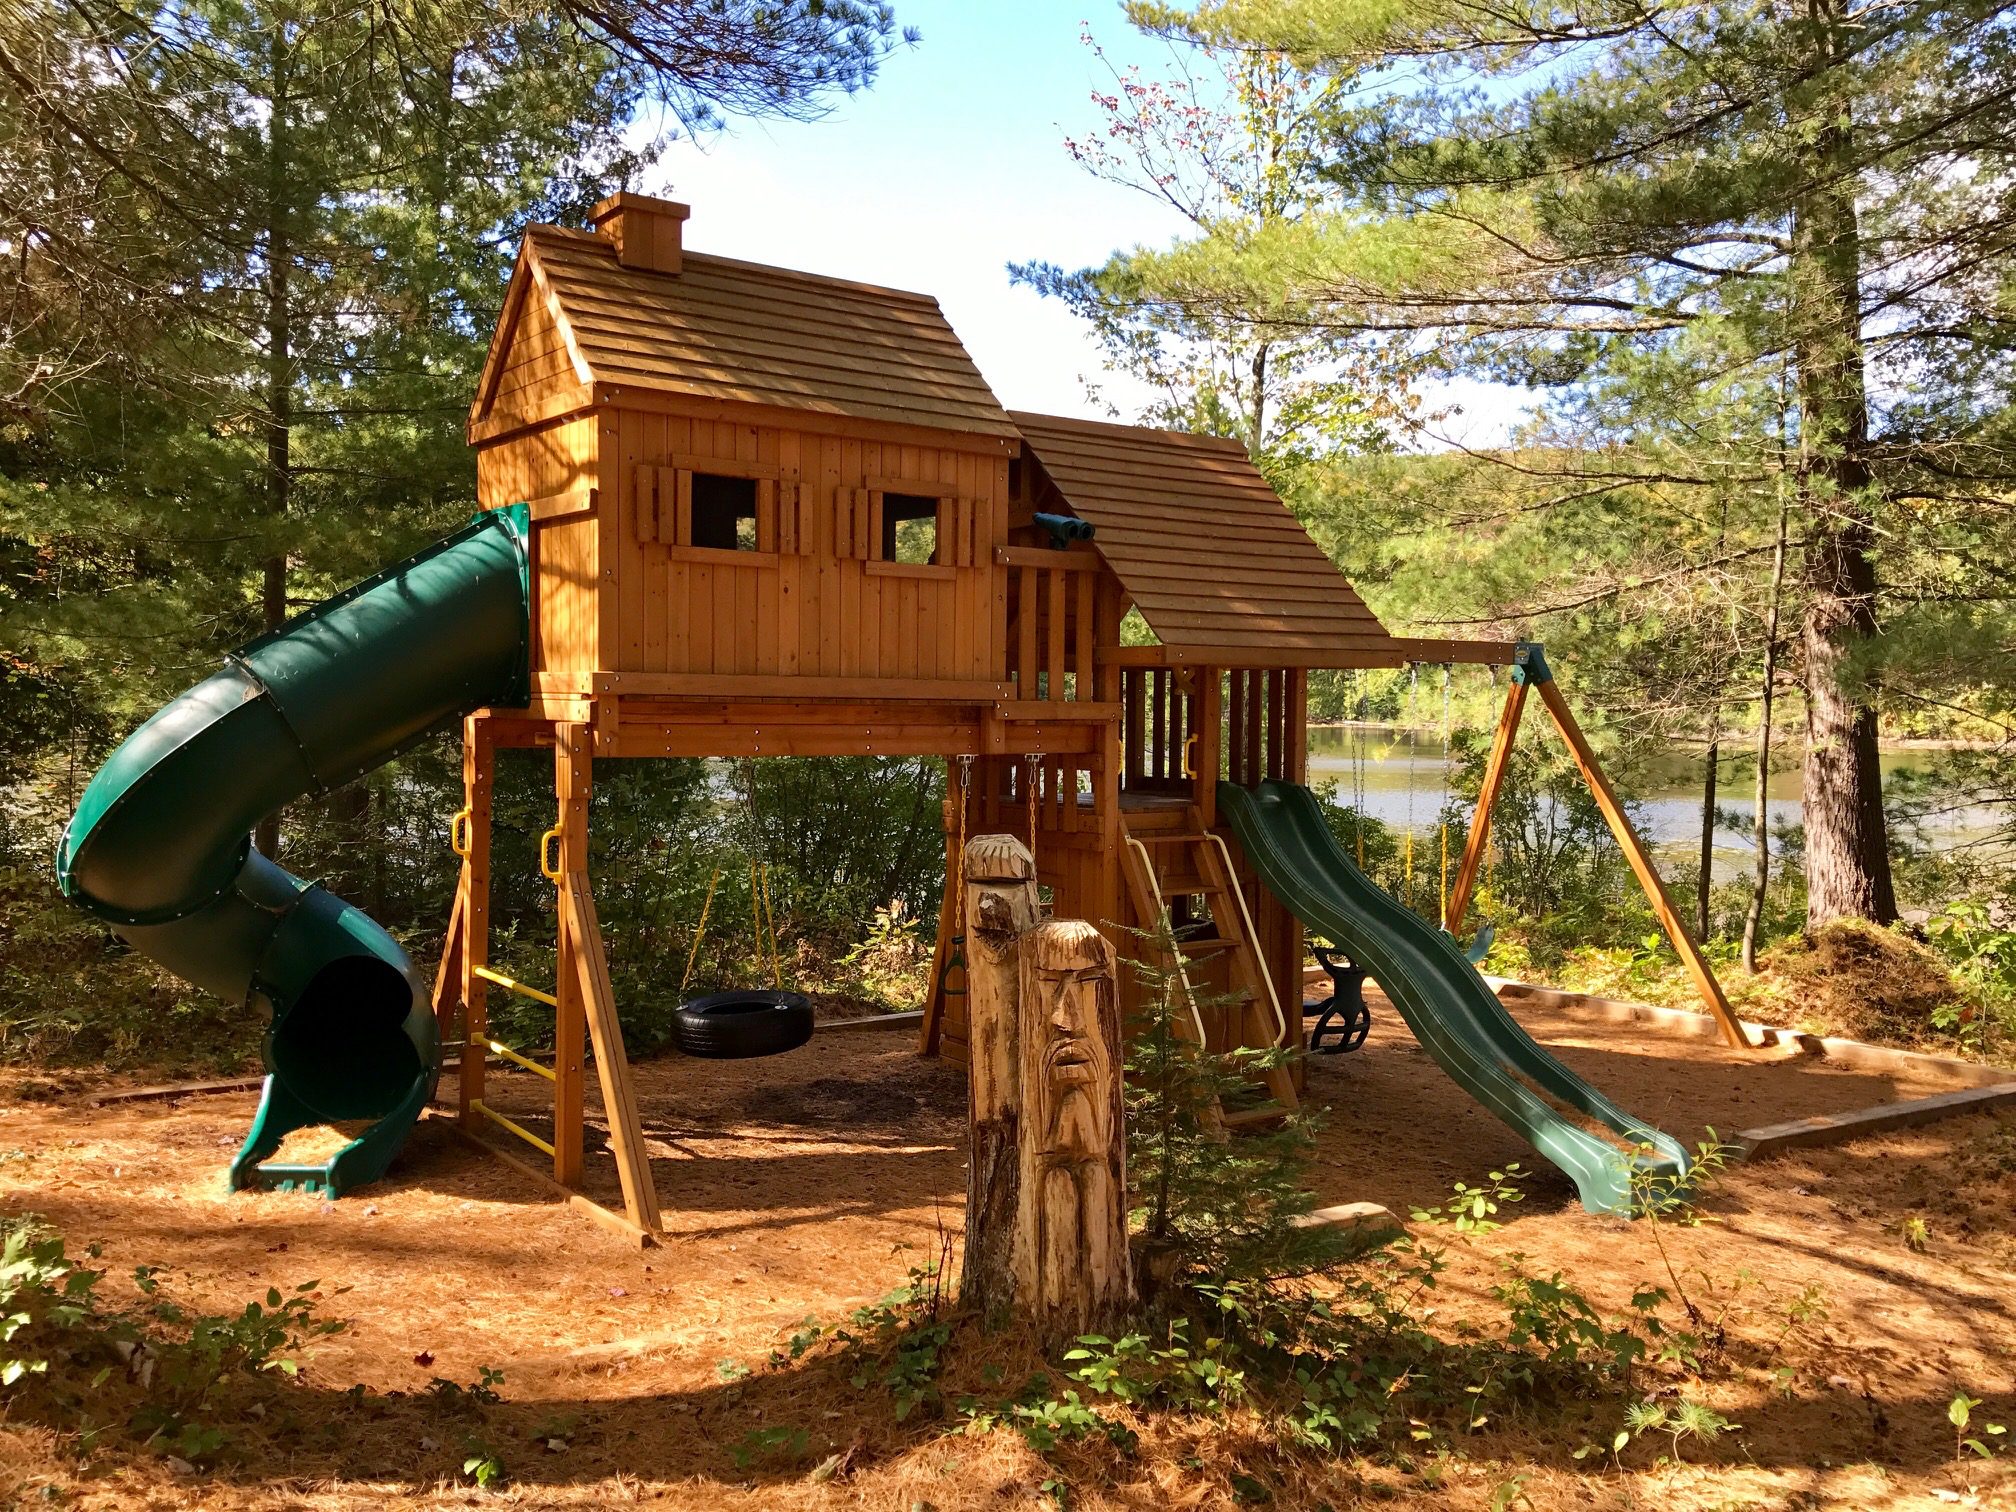 The Playhouse at The Bear Stand - a Kid's Dream Come True